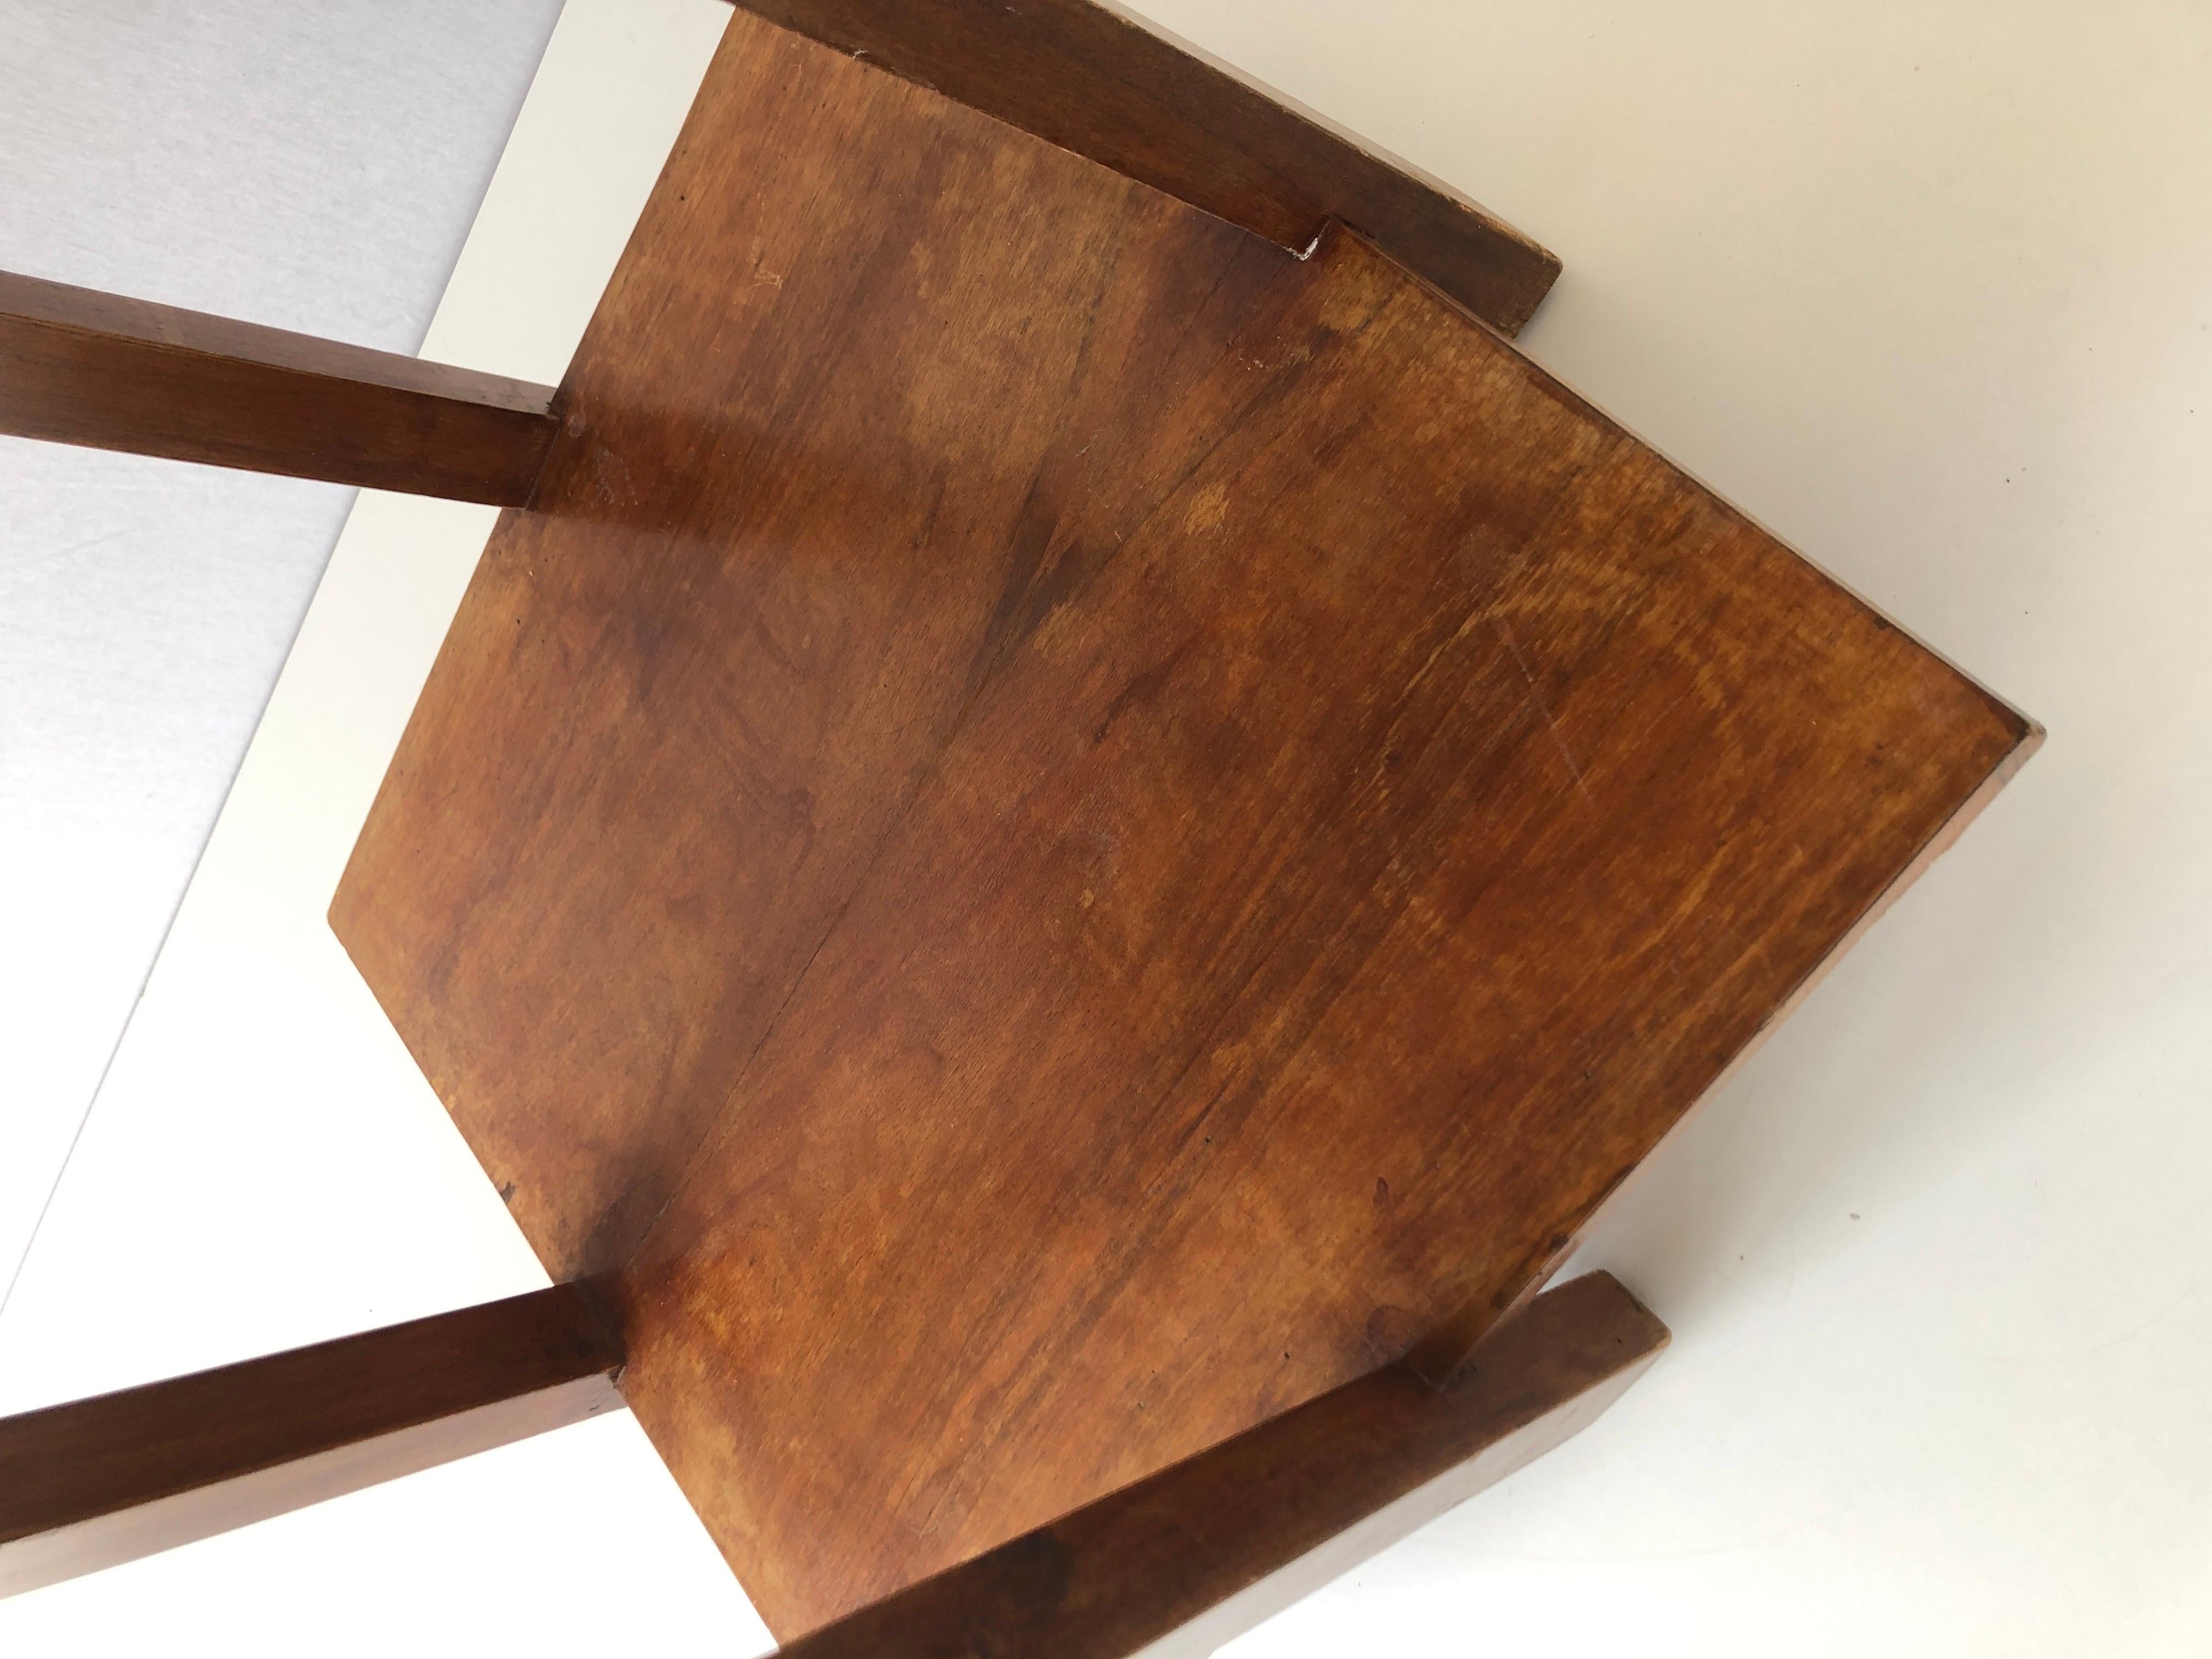 Art Deco Square Wood Corner or End Table, 1940s, Made in Italy For Sale 2